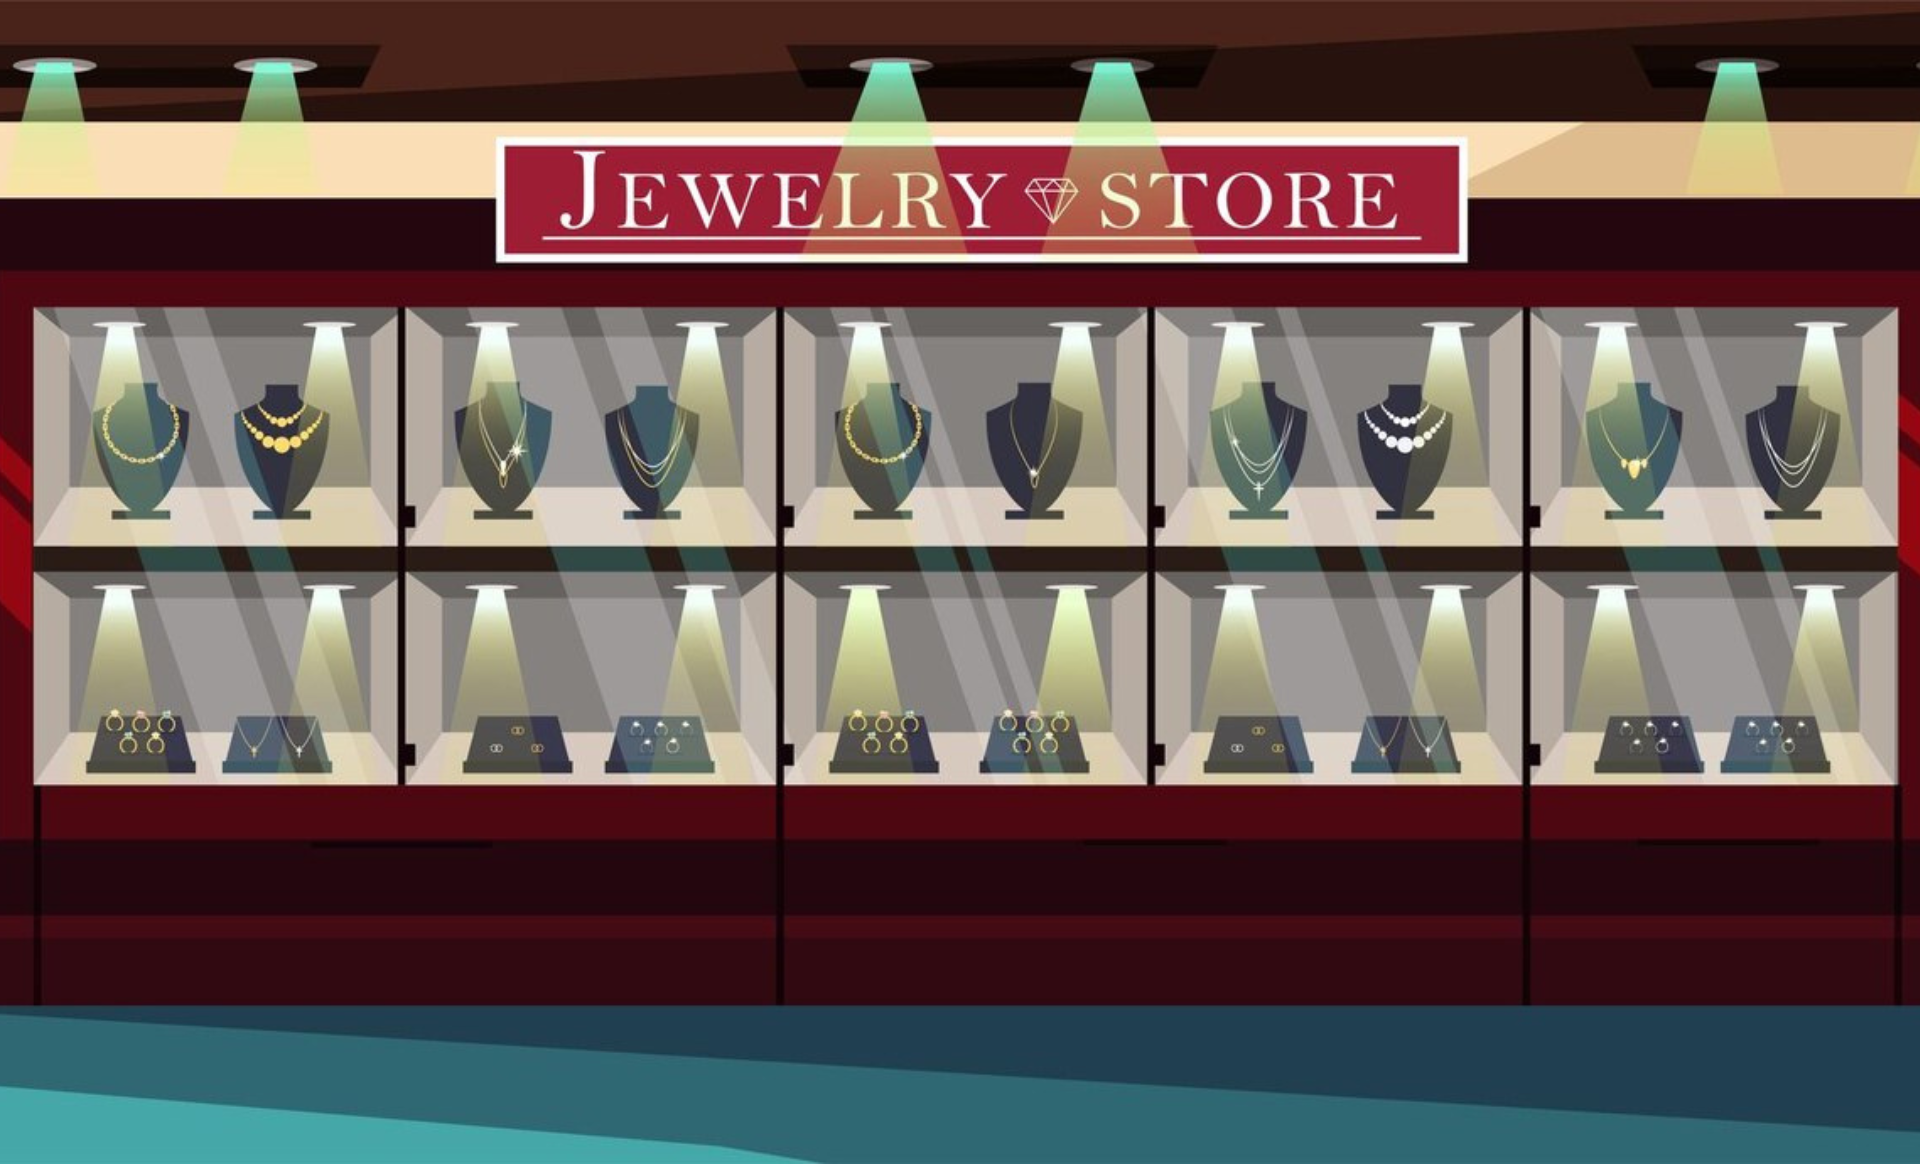 Digital marketing services for jewellery store